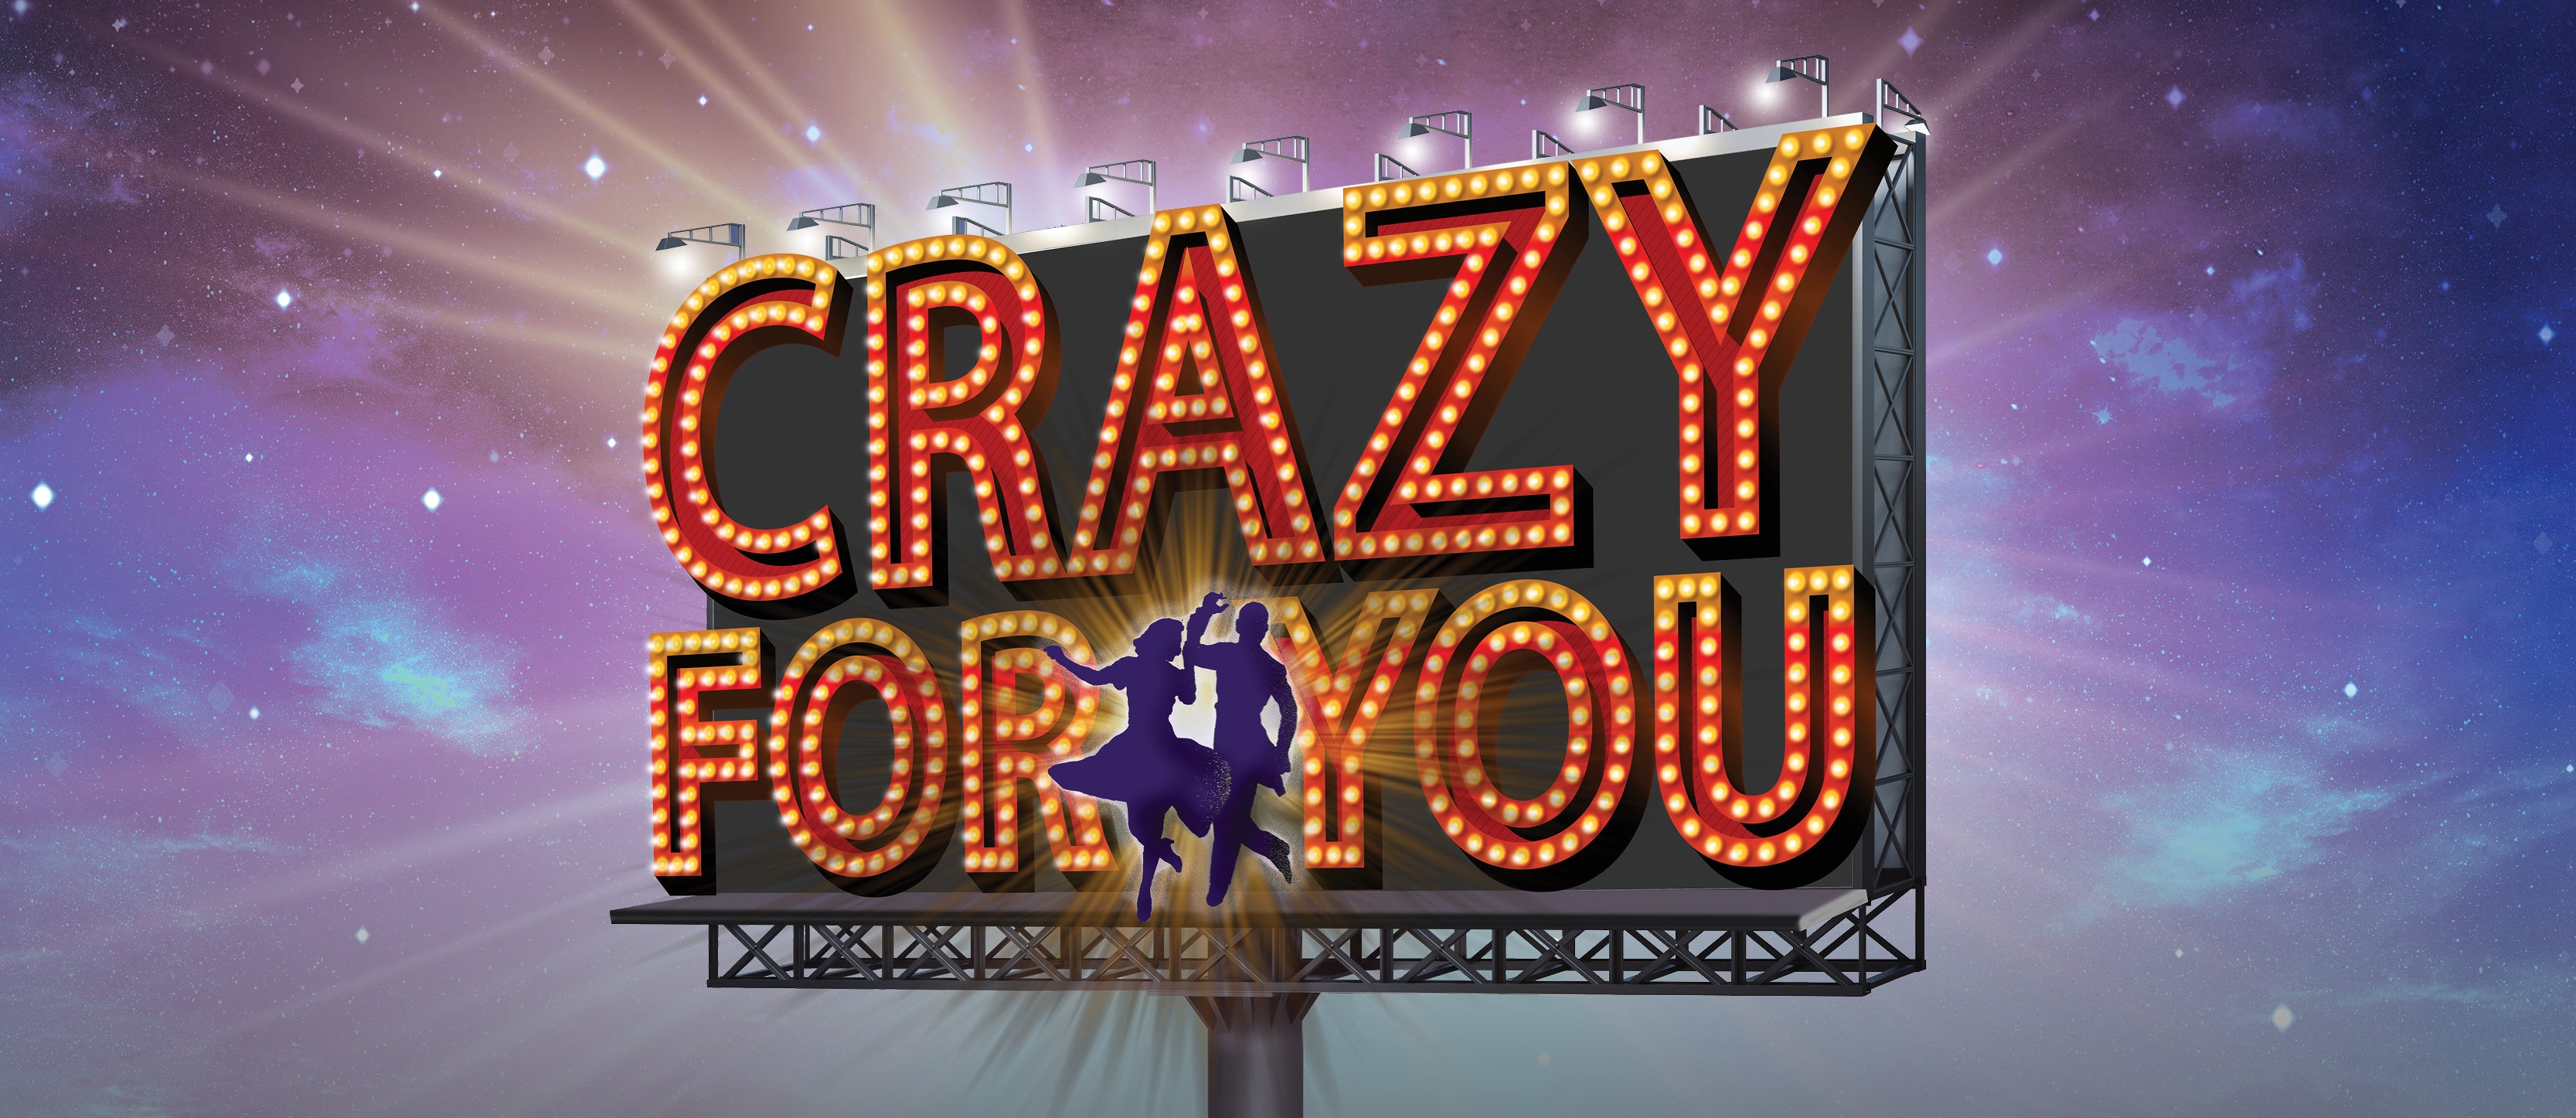 Crazy for You with Asolo Repertory Theatre - Artelize